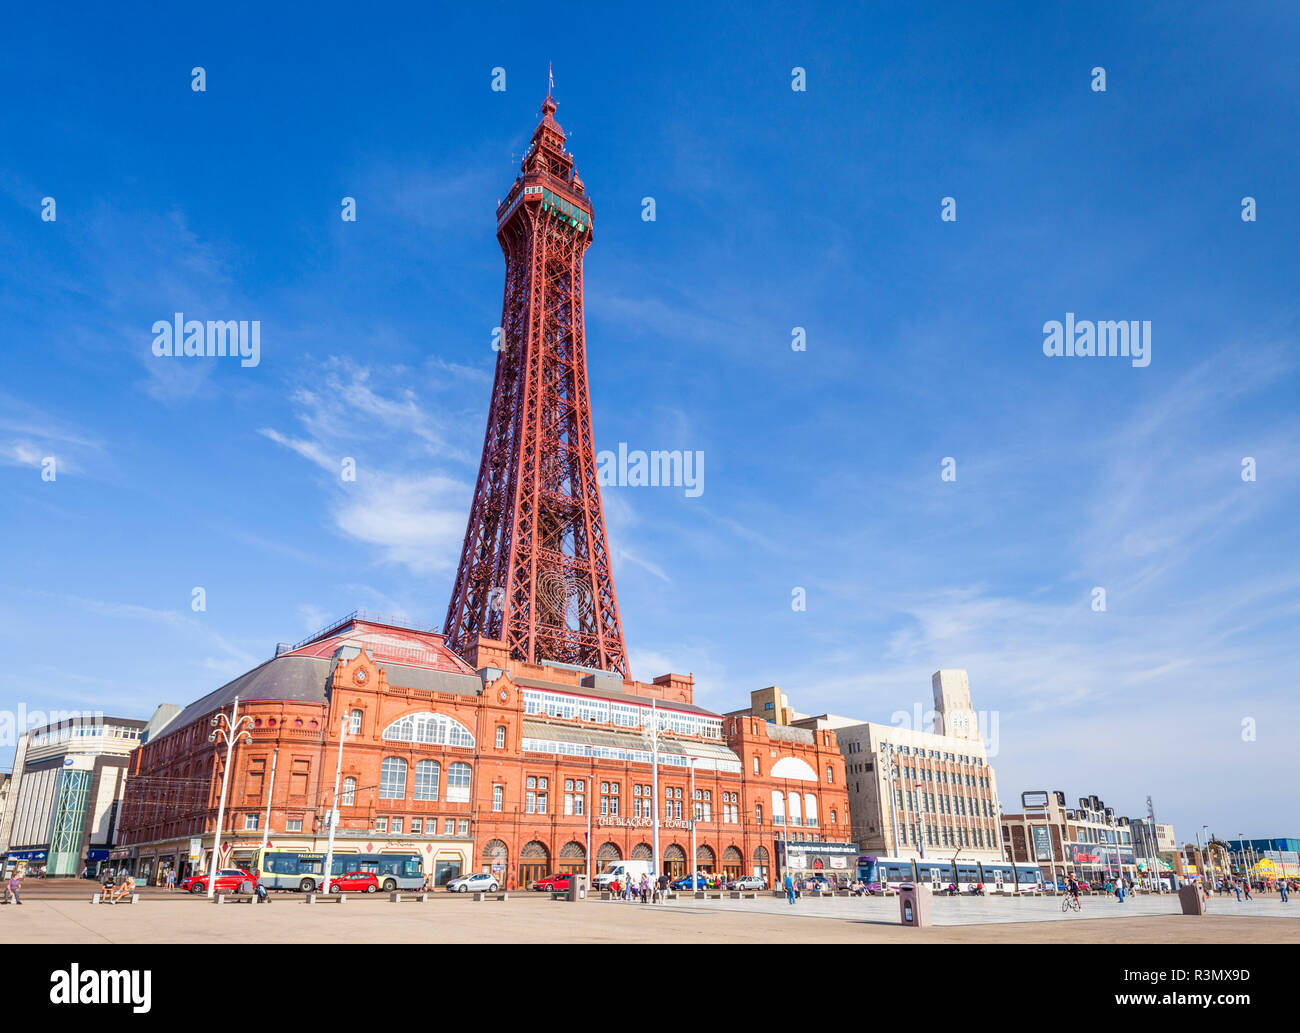 Blackpool tower tower ballroom and seafront promenade Blackpool Promenade Blackpool Lancashire England GB UK Europe Stock Photo